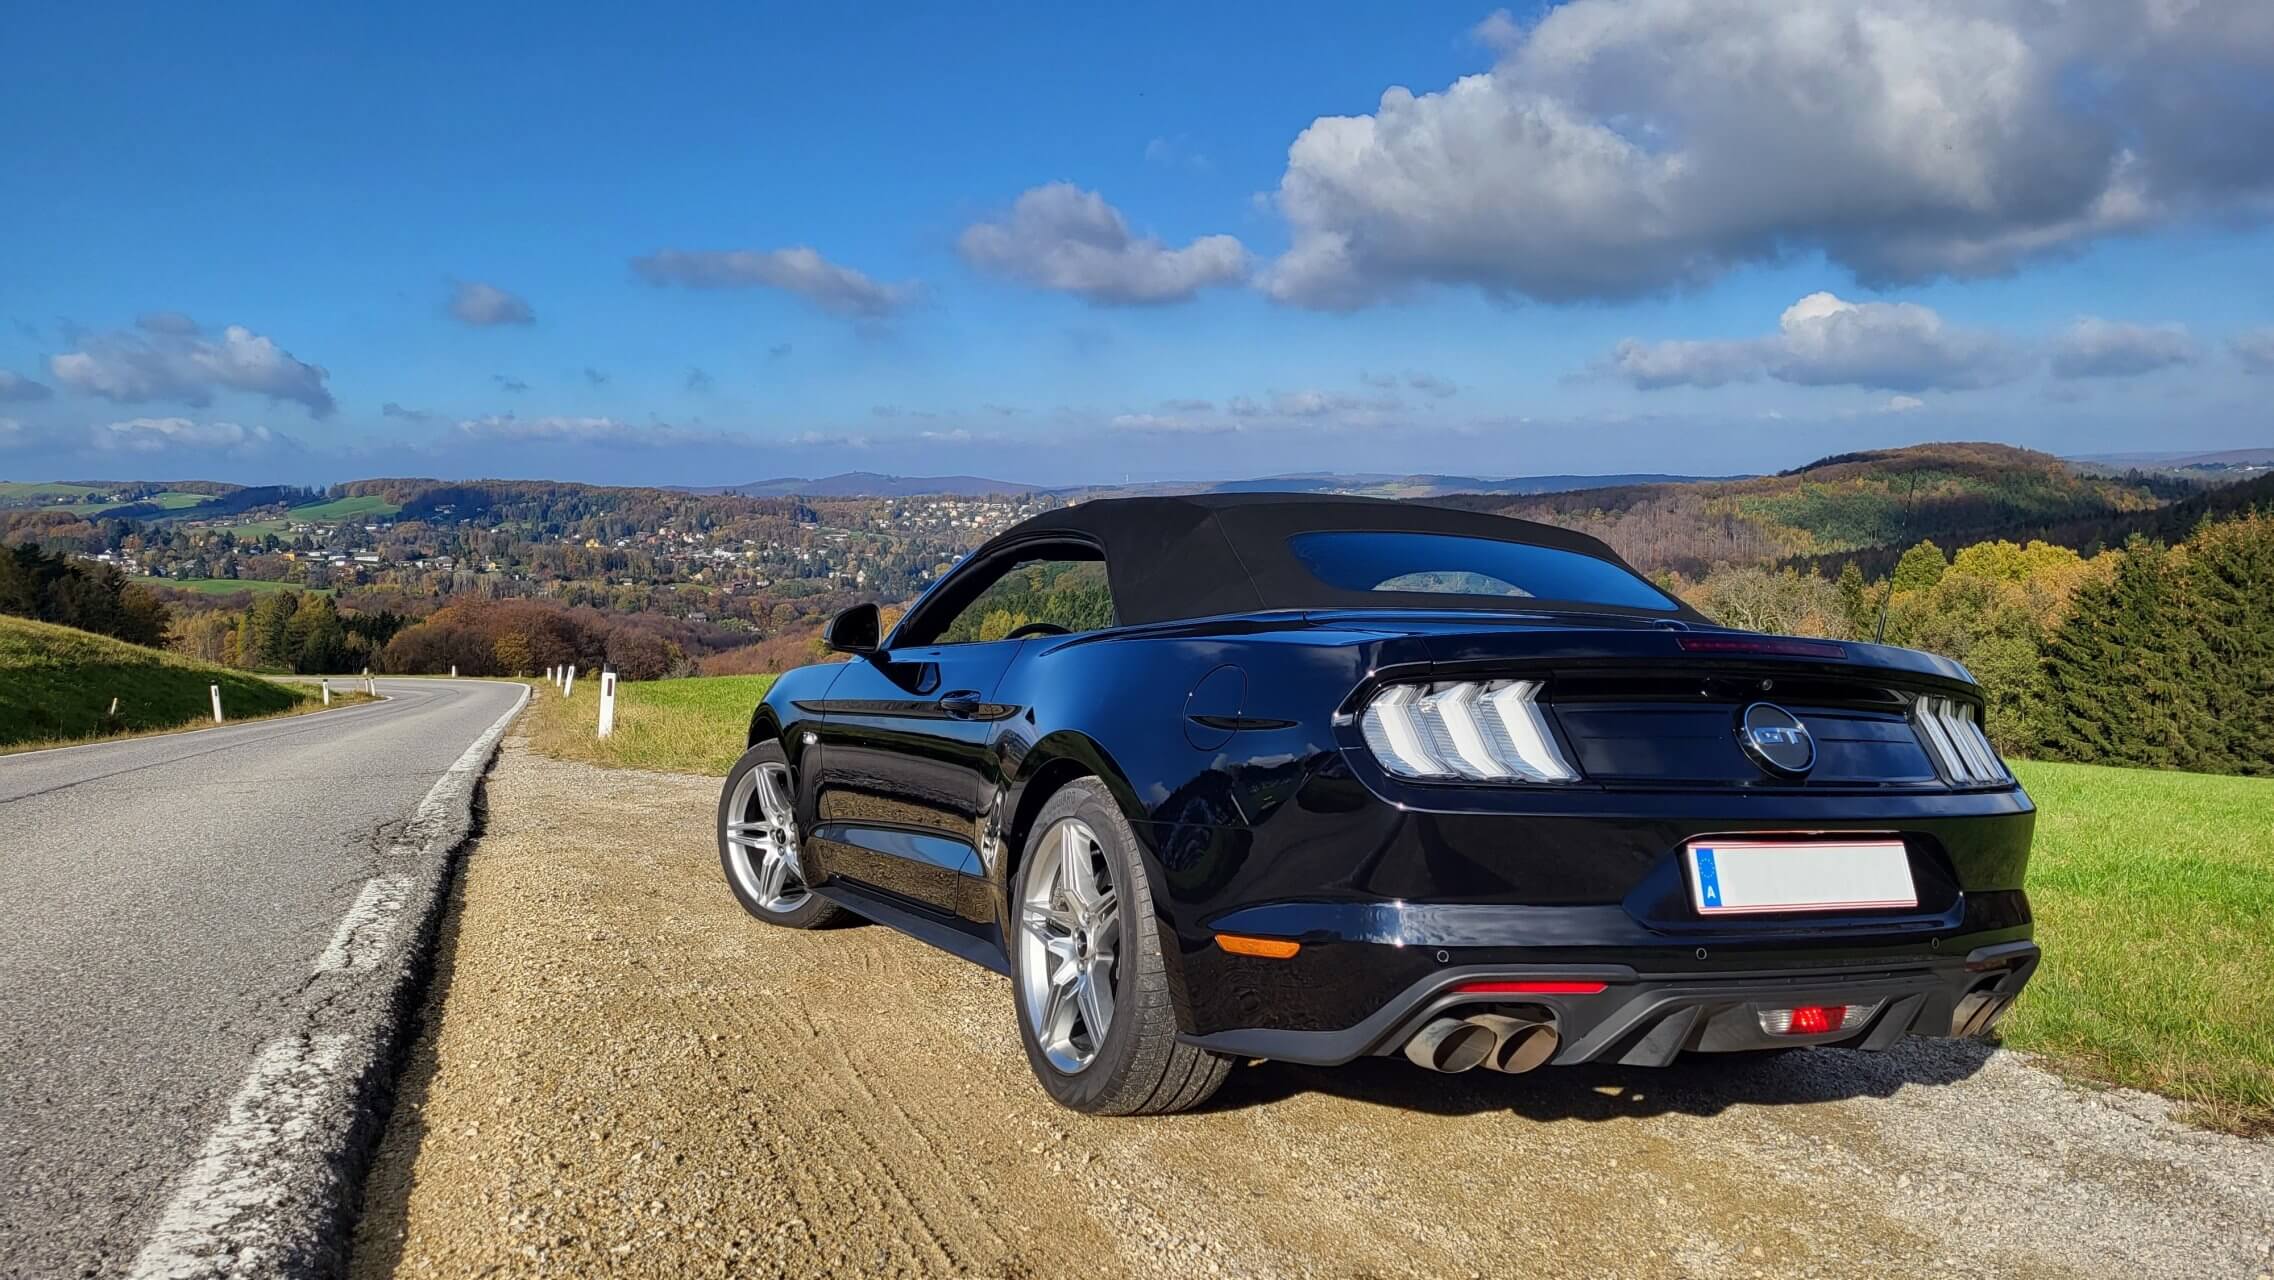 Ford Mustang GT 5.0 Cabrio - 8060c057-c5dc-4ed6-a09f-223541966448